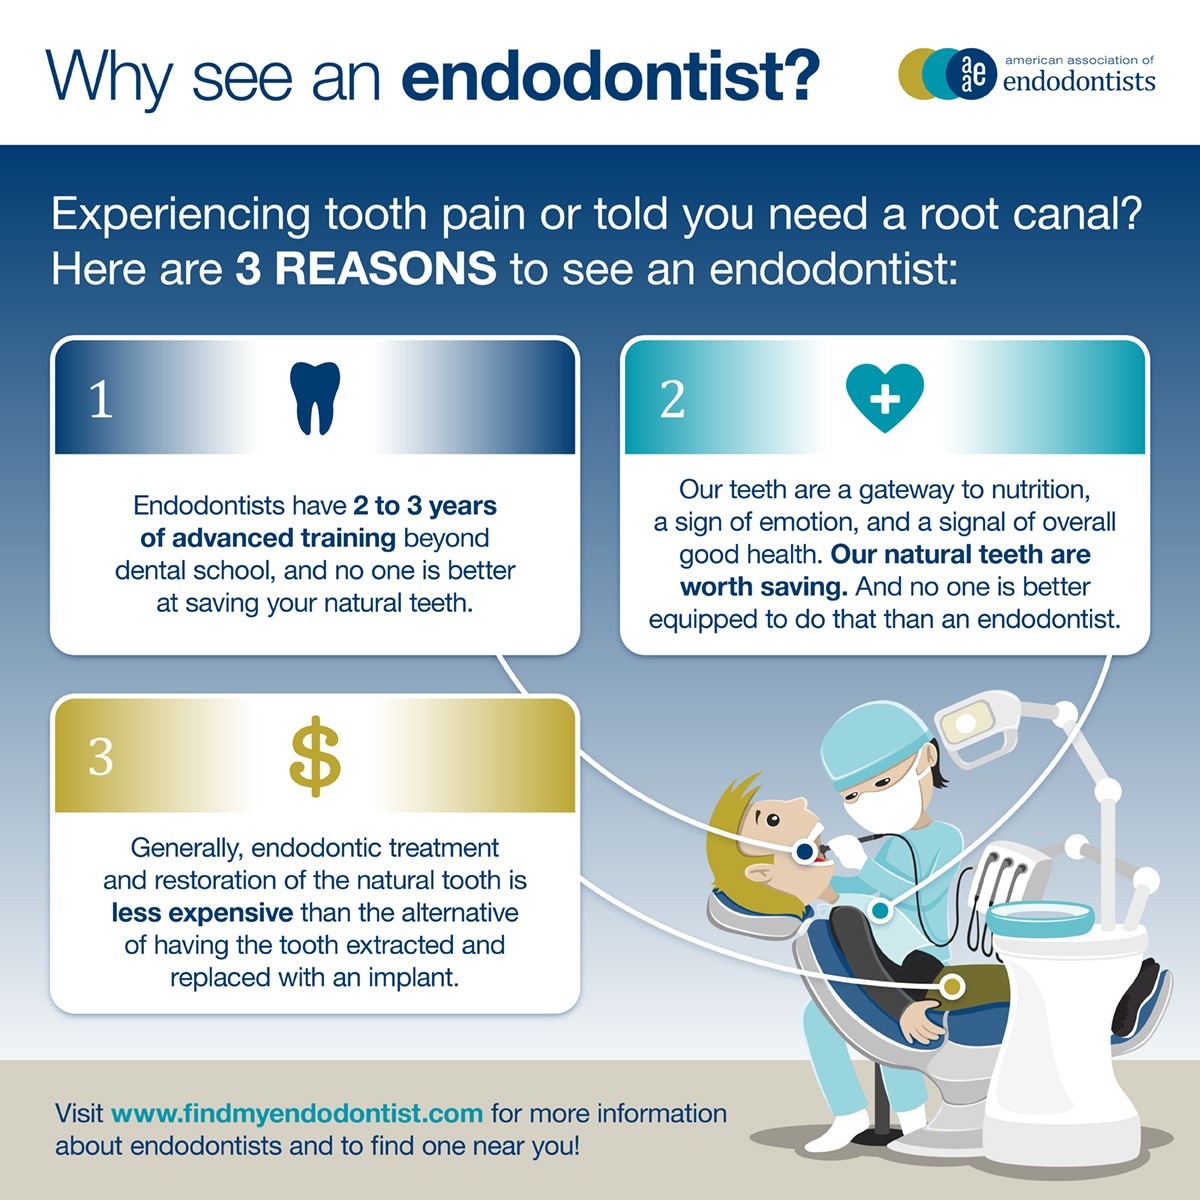 Why see an endodontist?